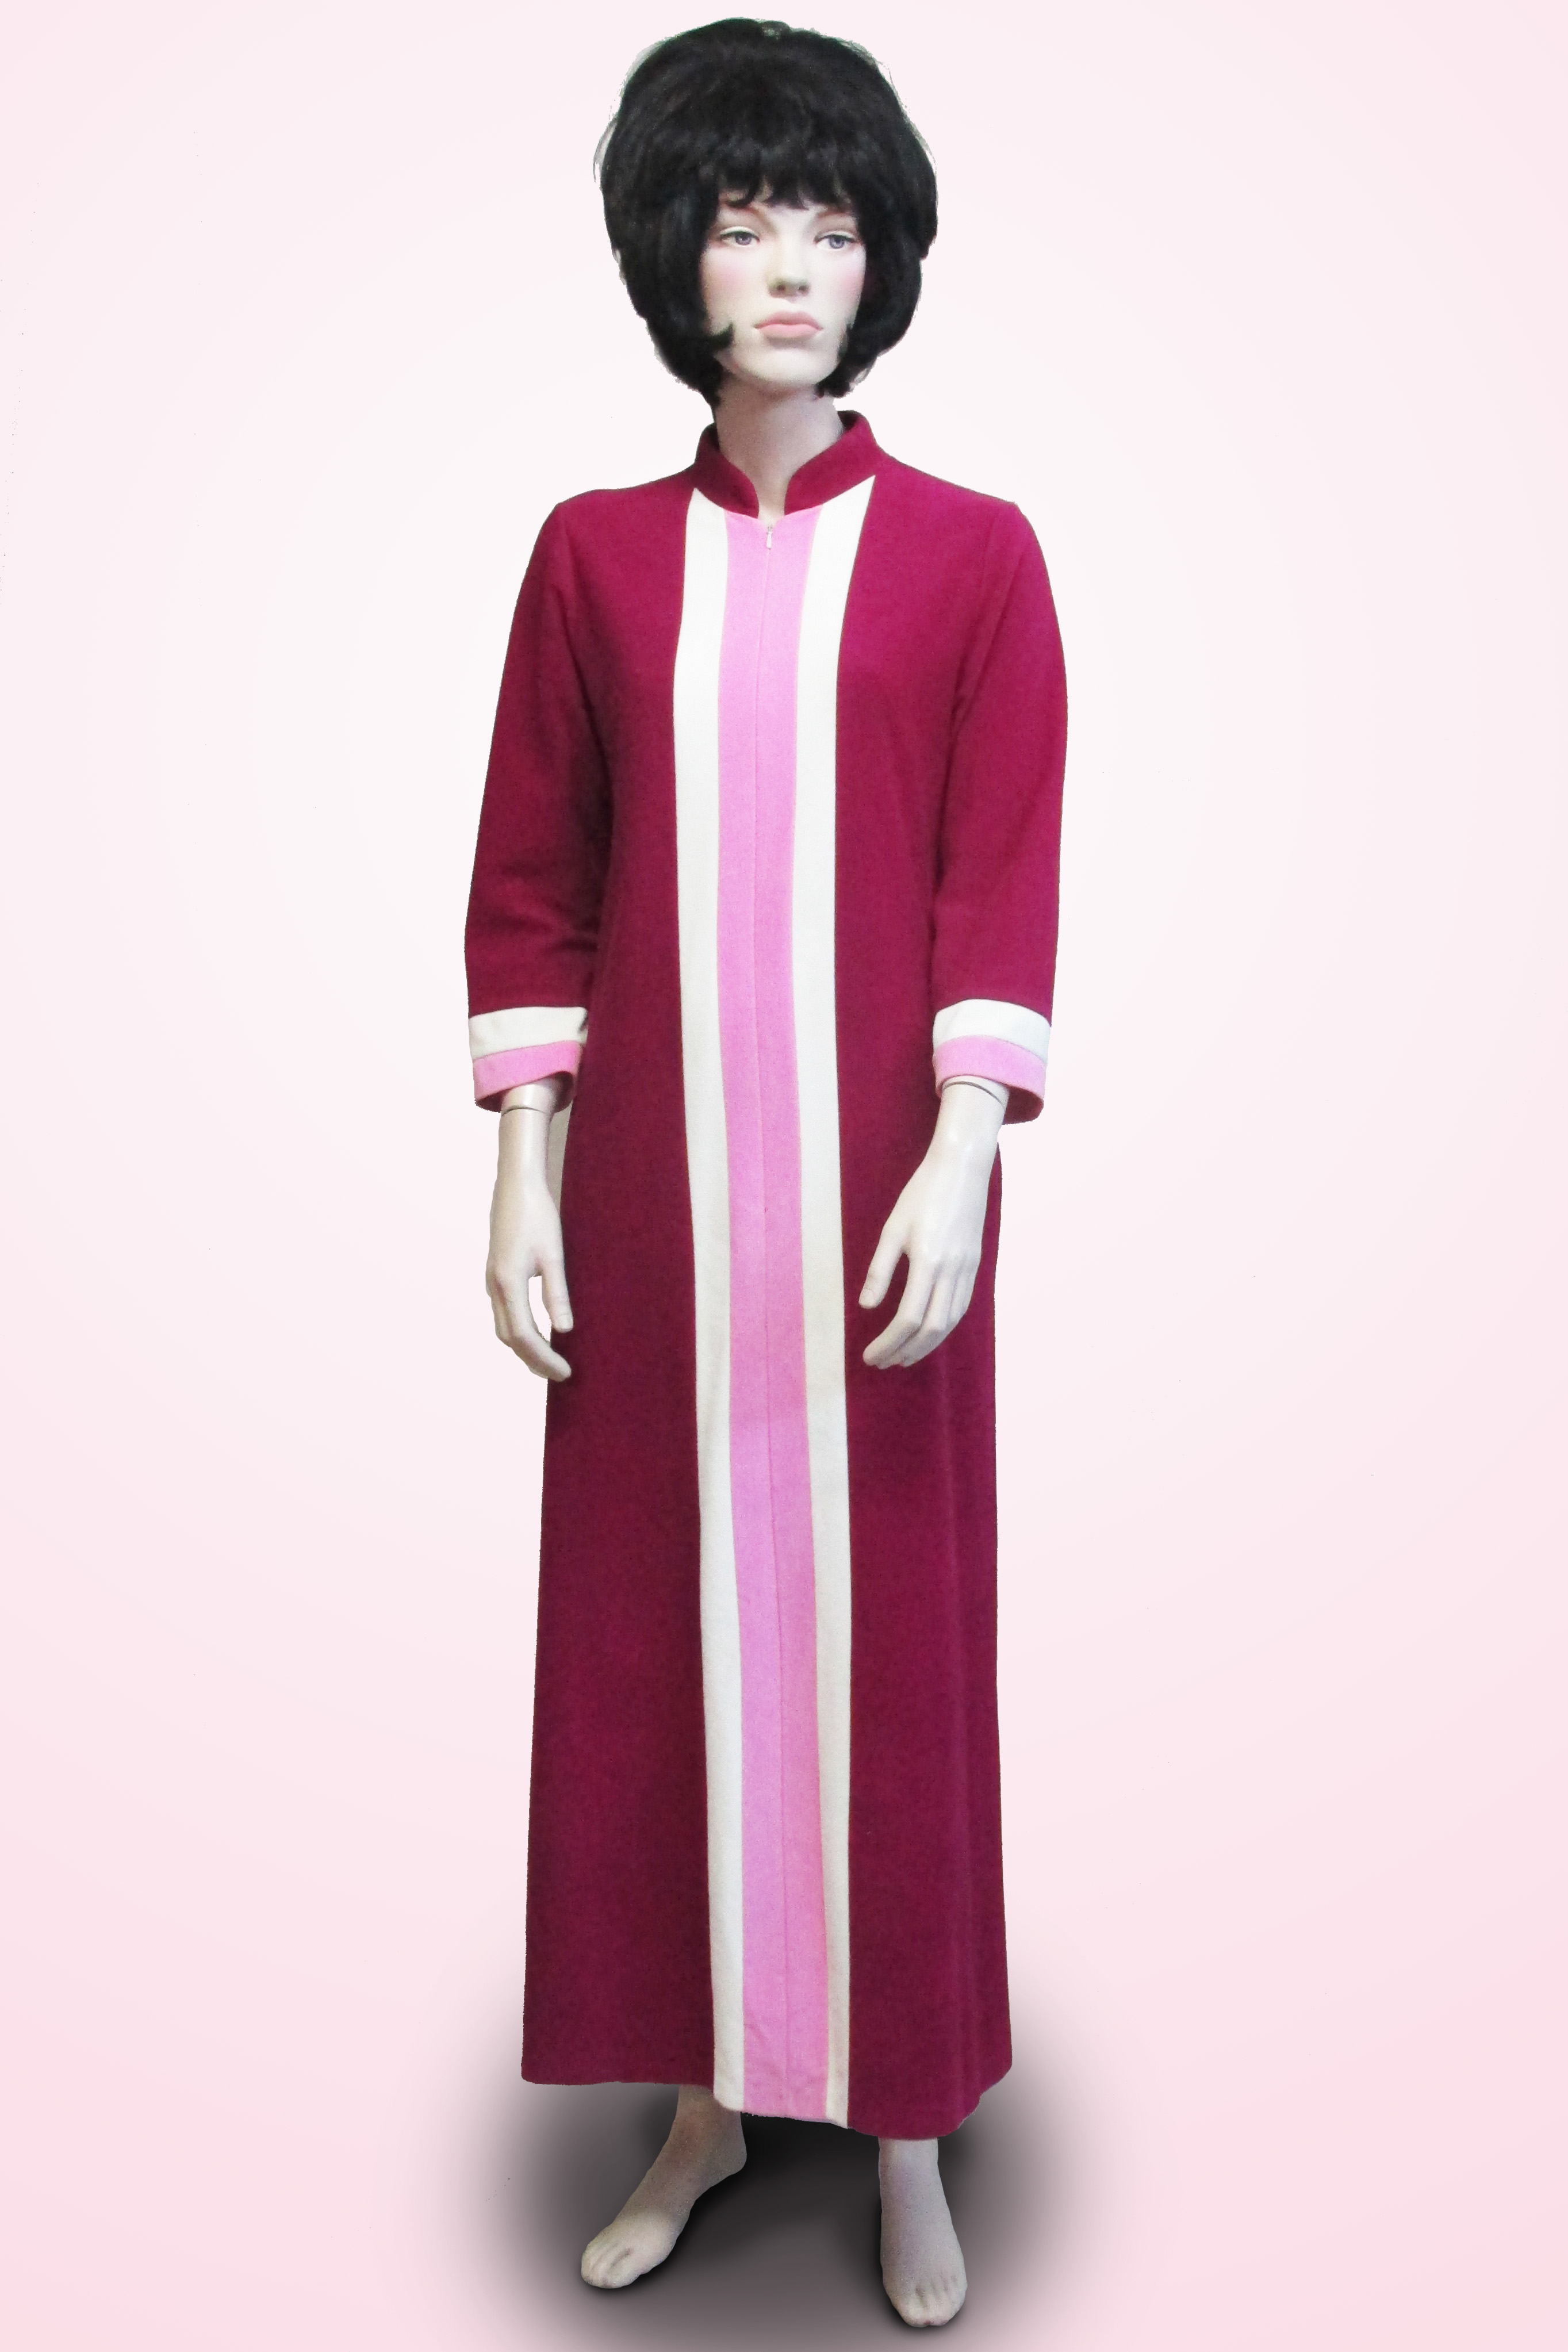 Dressing Gown Dark Pink with Stripe At Front 1960s